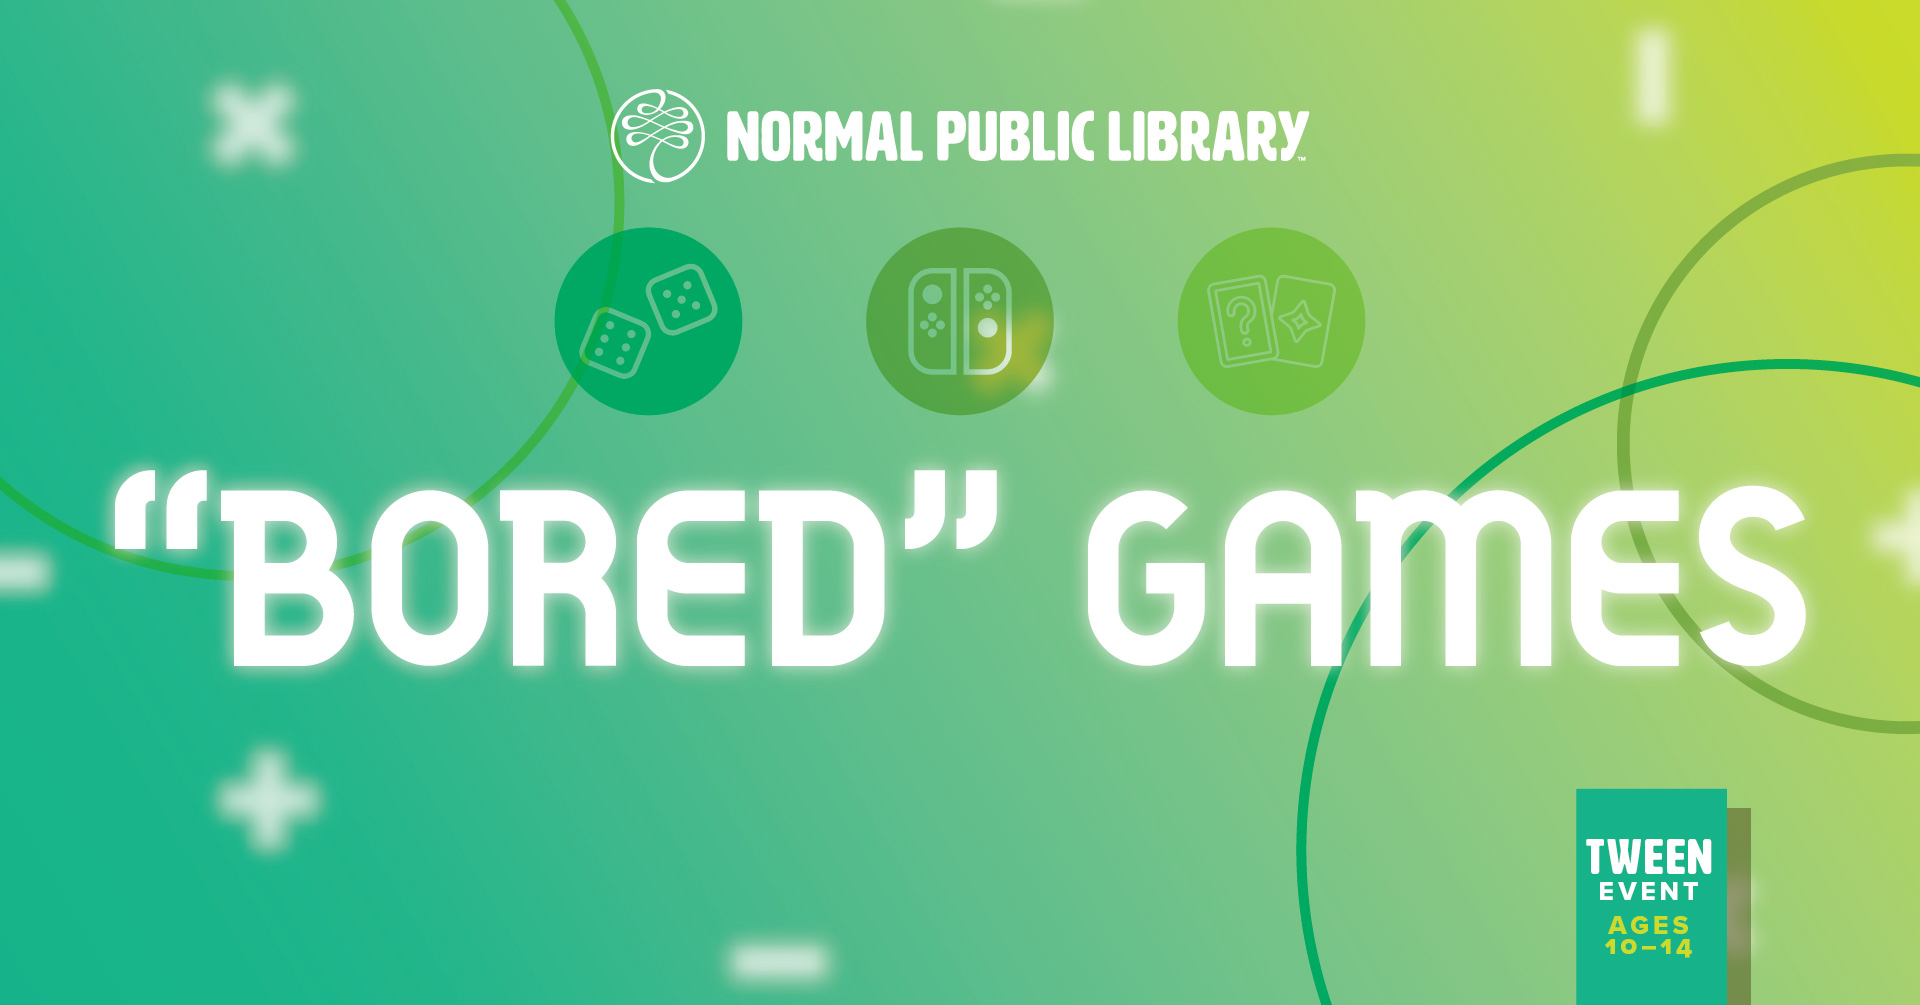 Image for "Bored" Games.